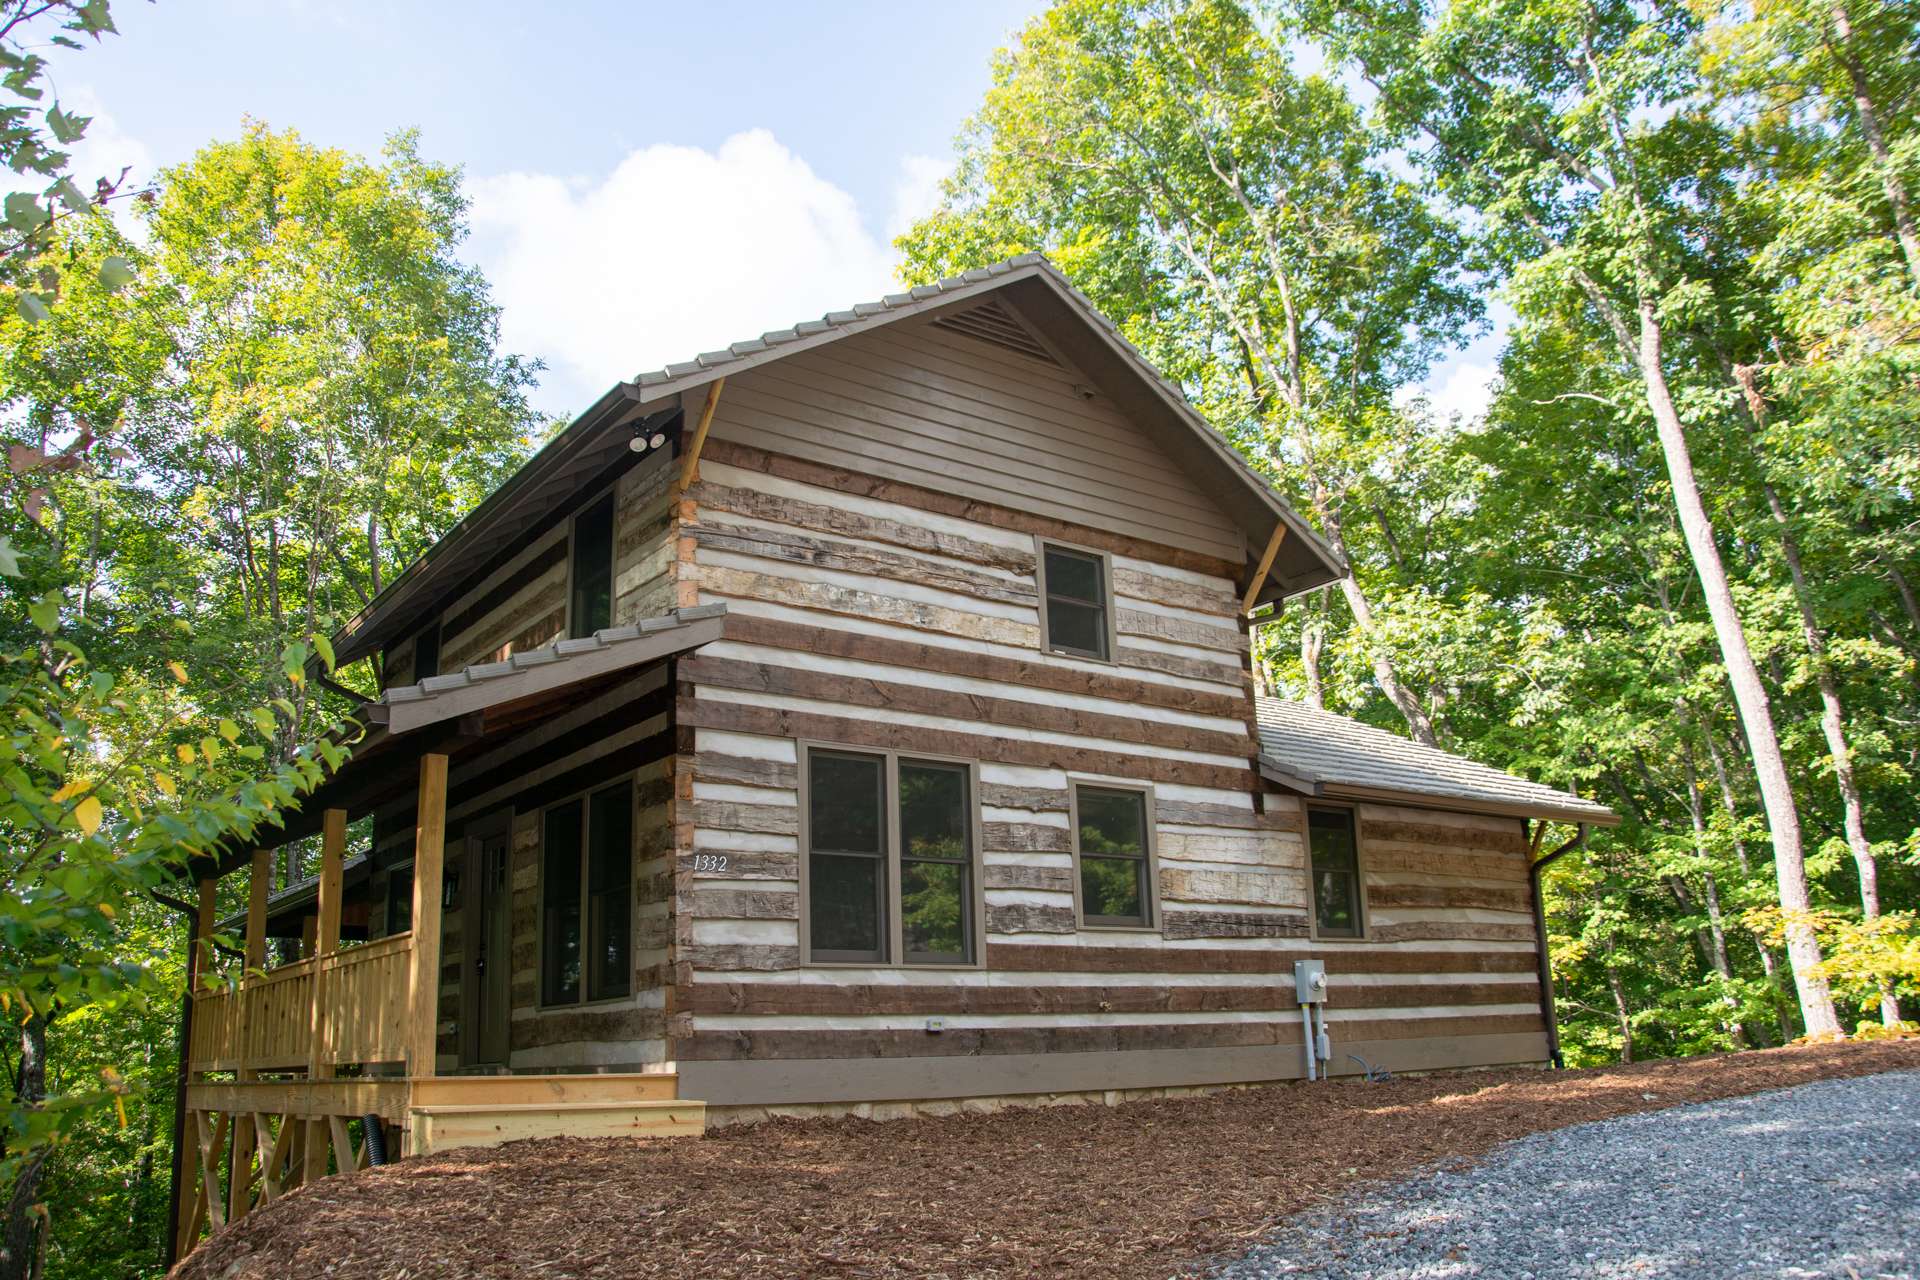 Completion is nearing  just in time to enjoy the colorful fall foliage in your brand new log cabin in the mountains of North Carolina.  H177